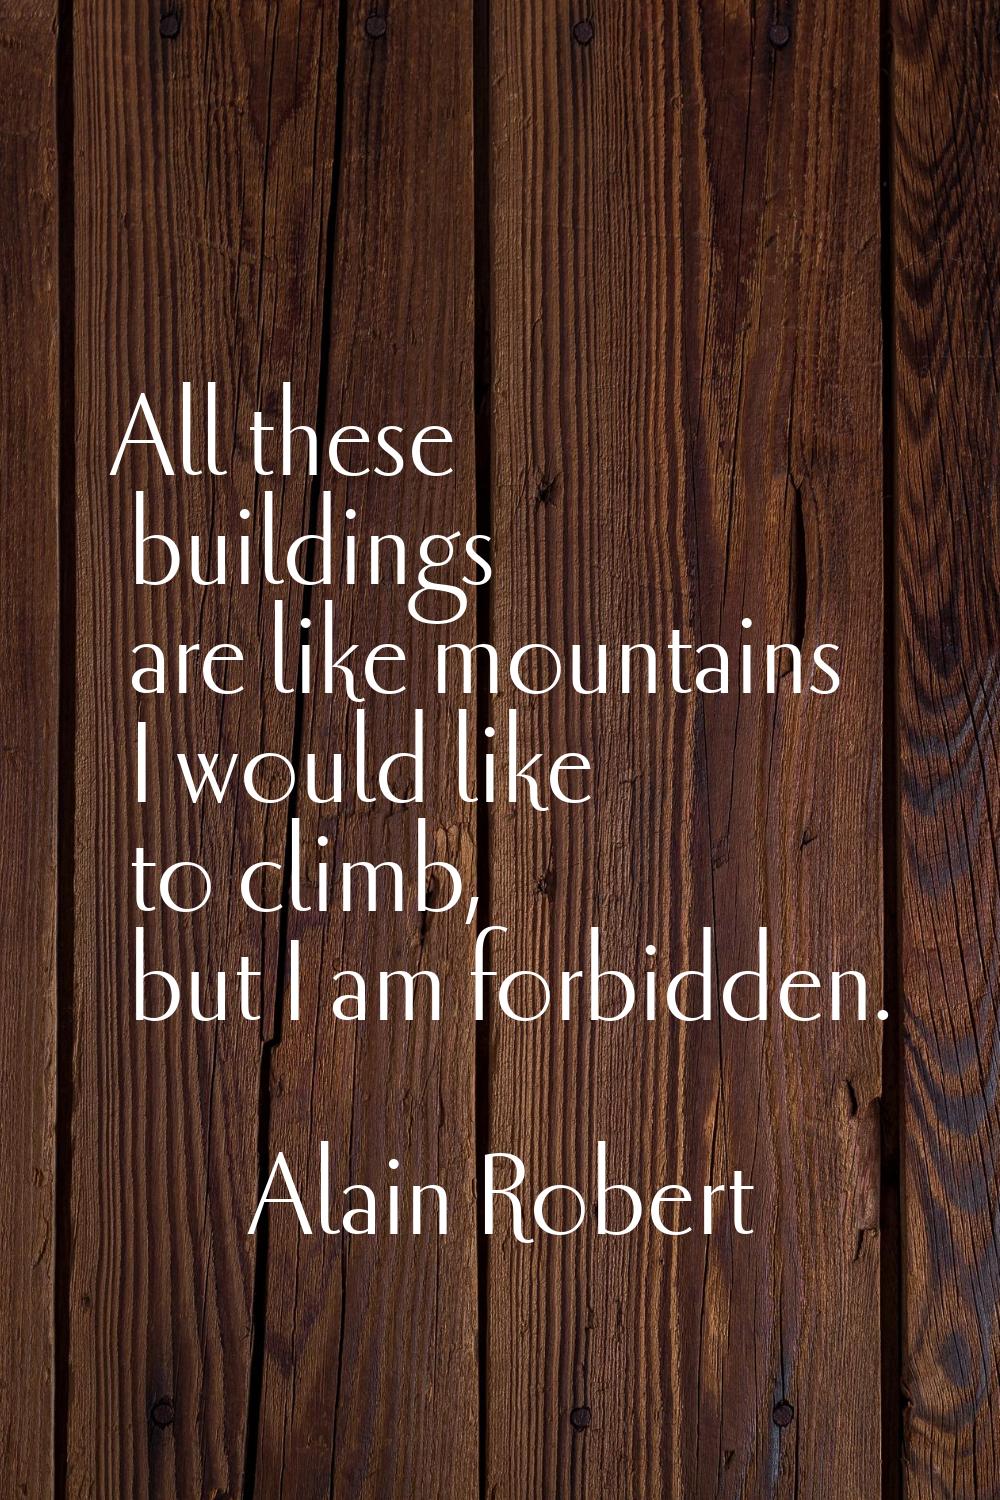 All these buildings are like mountains I would like to climb, but I am forbidden.